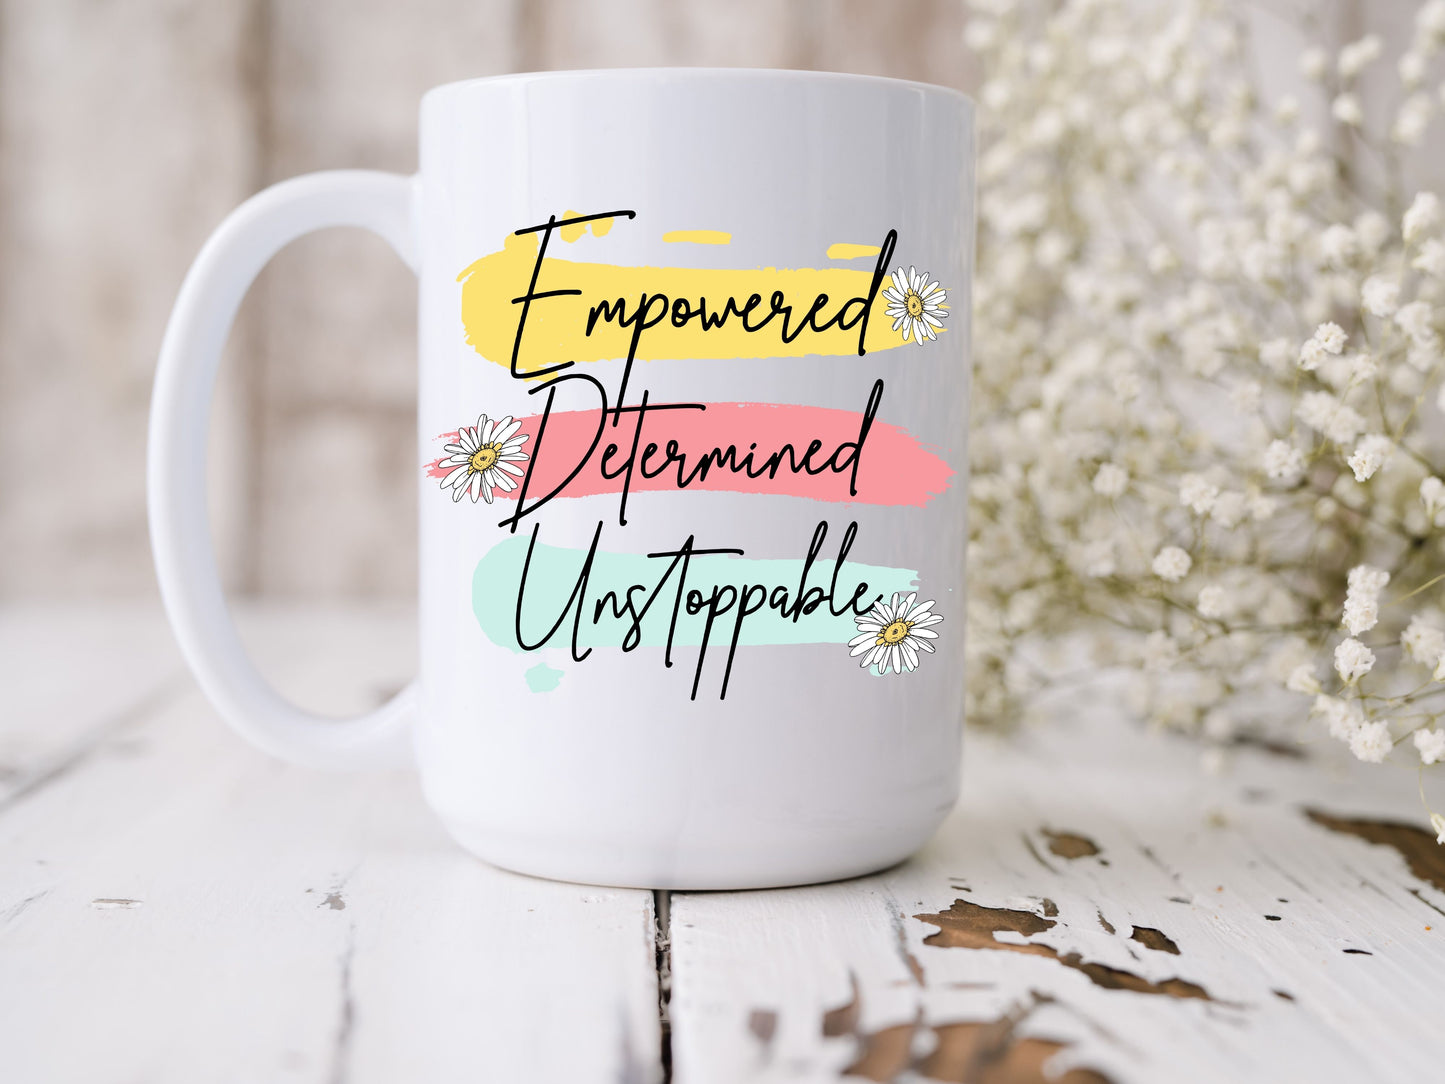 Empowered Determined Unstoppable mug